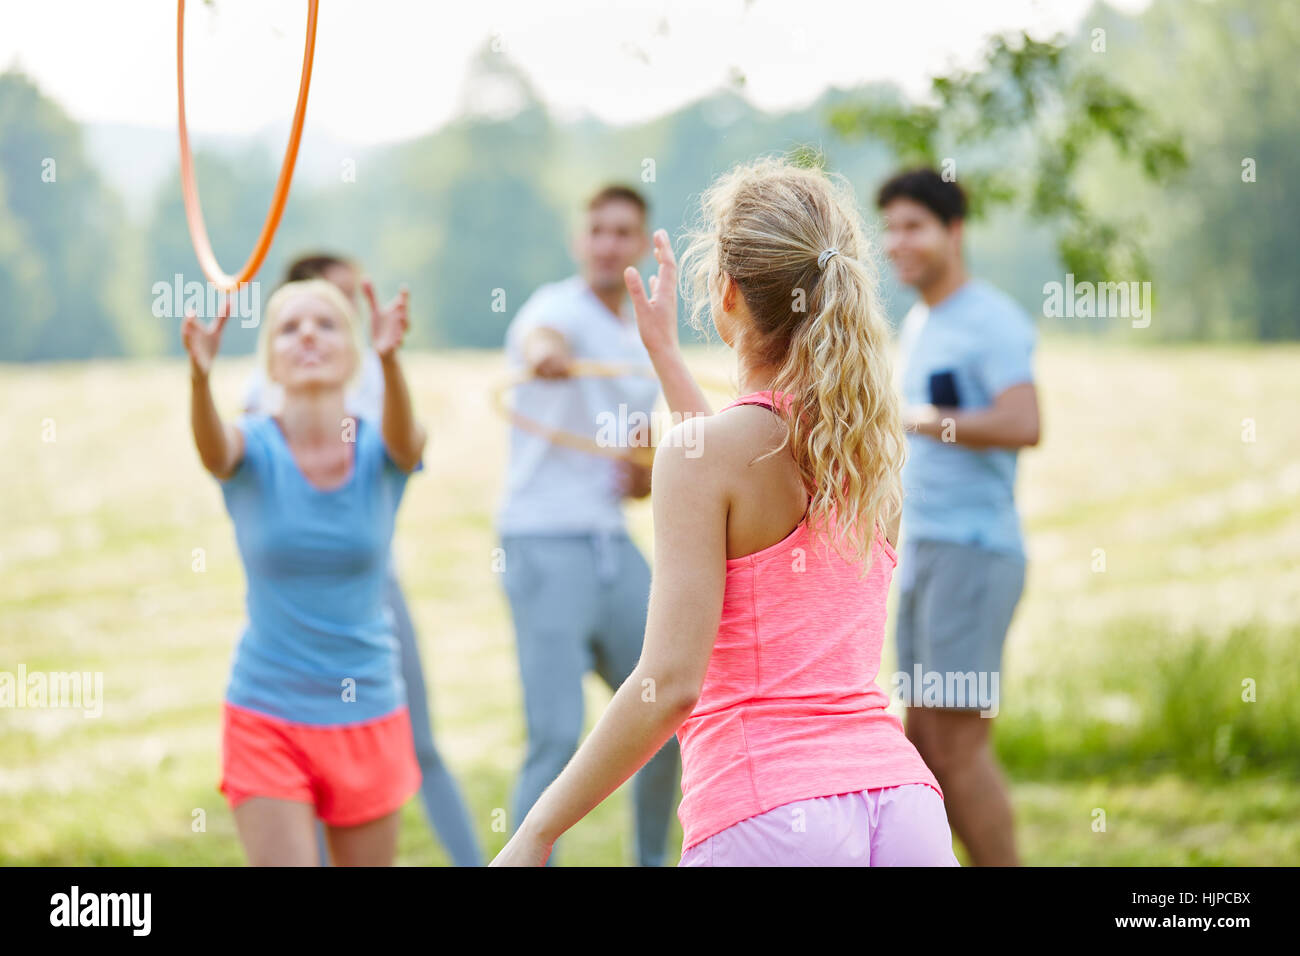 Friends play catching hulas in the nature for fitness Stock Photo